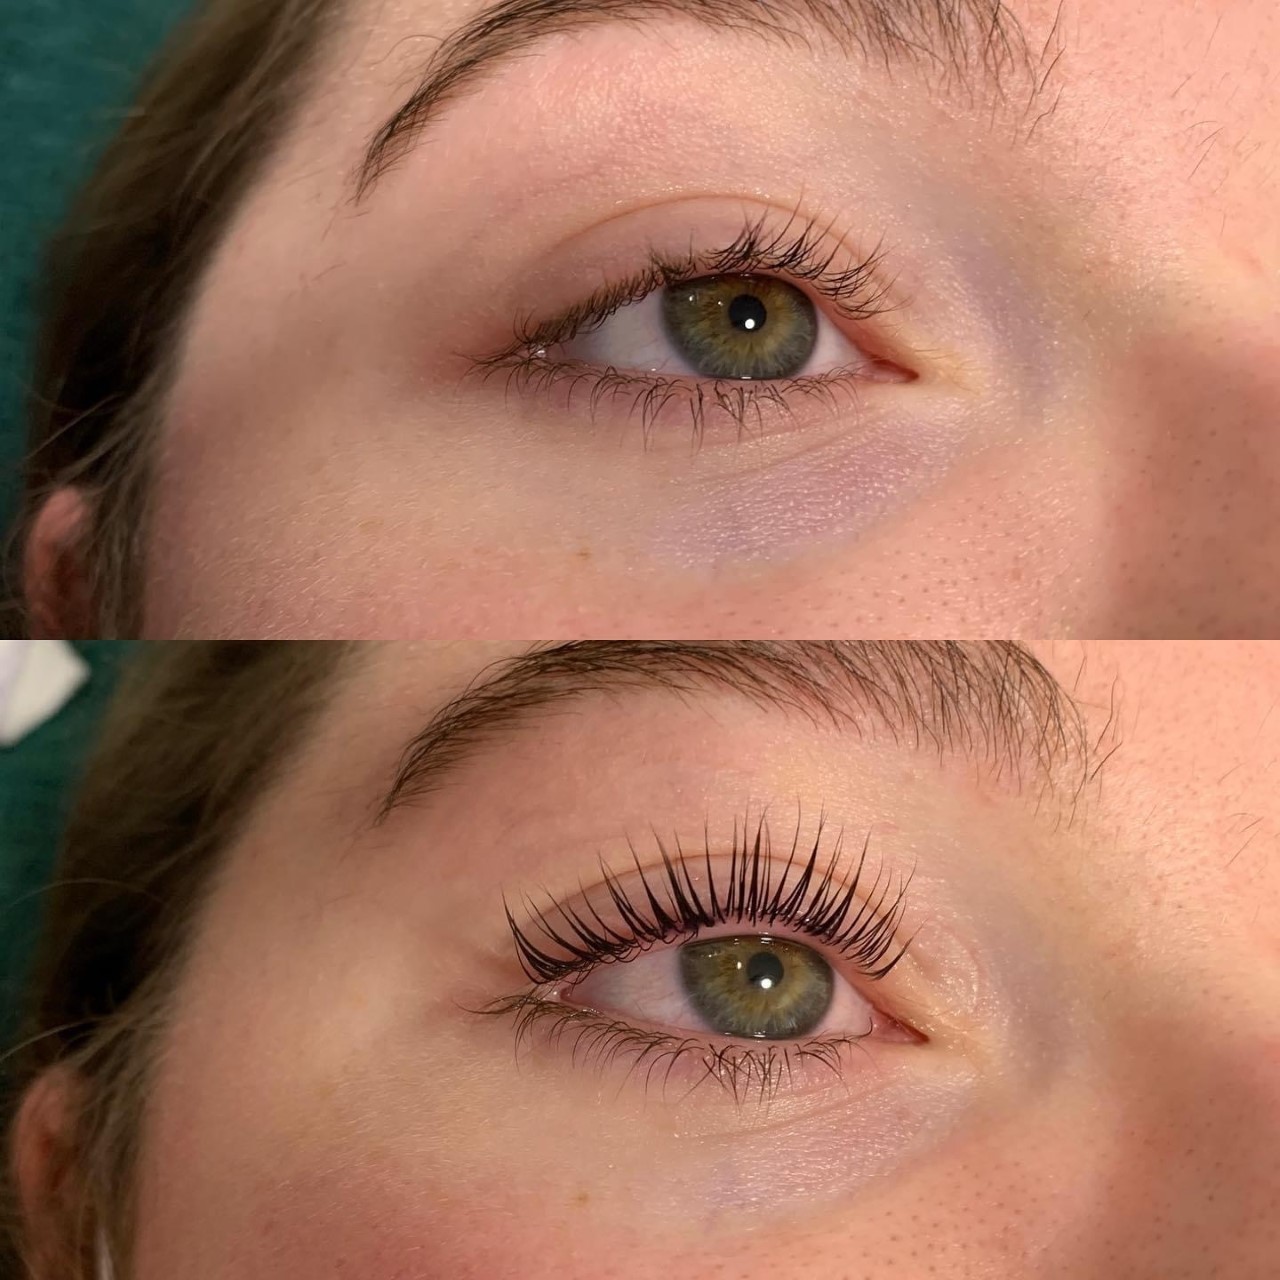 LVL lash lifts are popular with clients